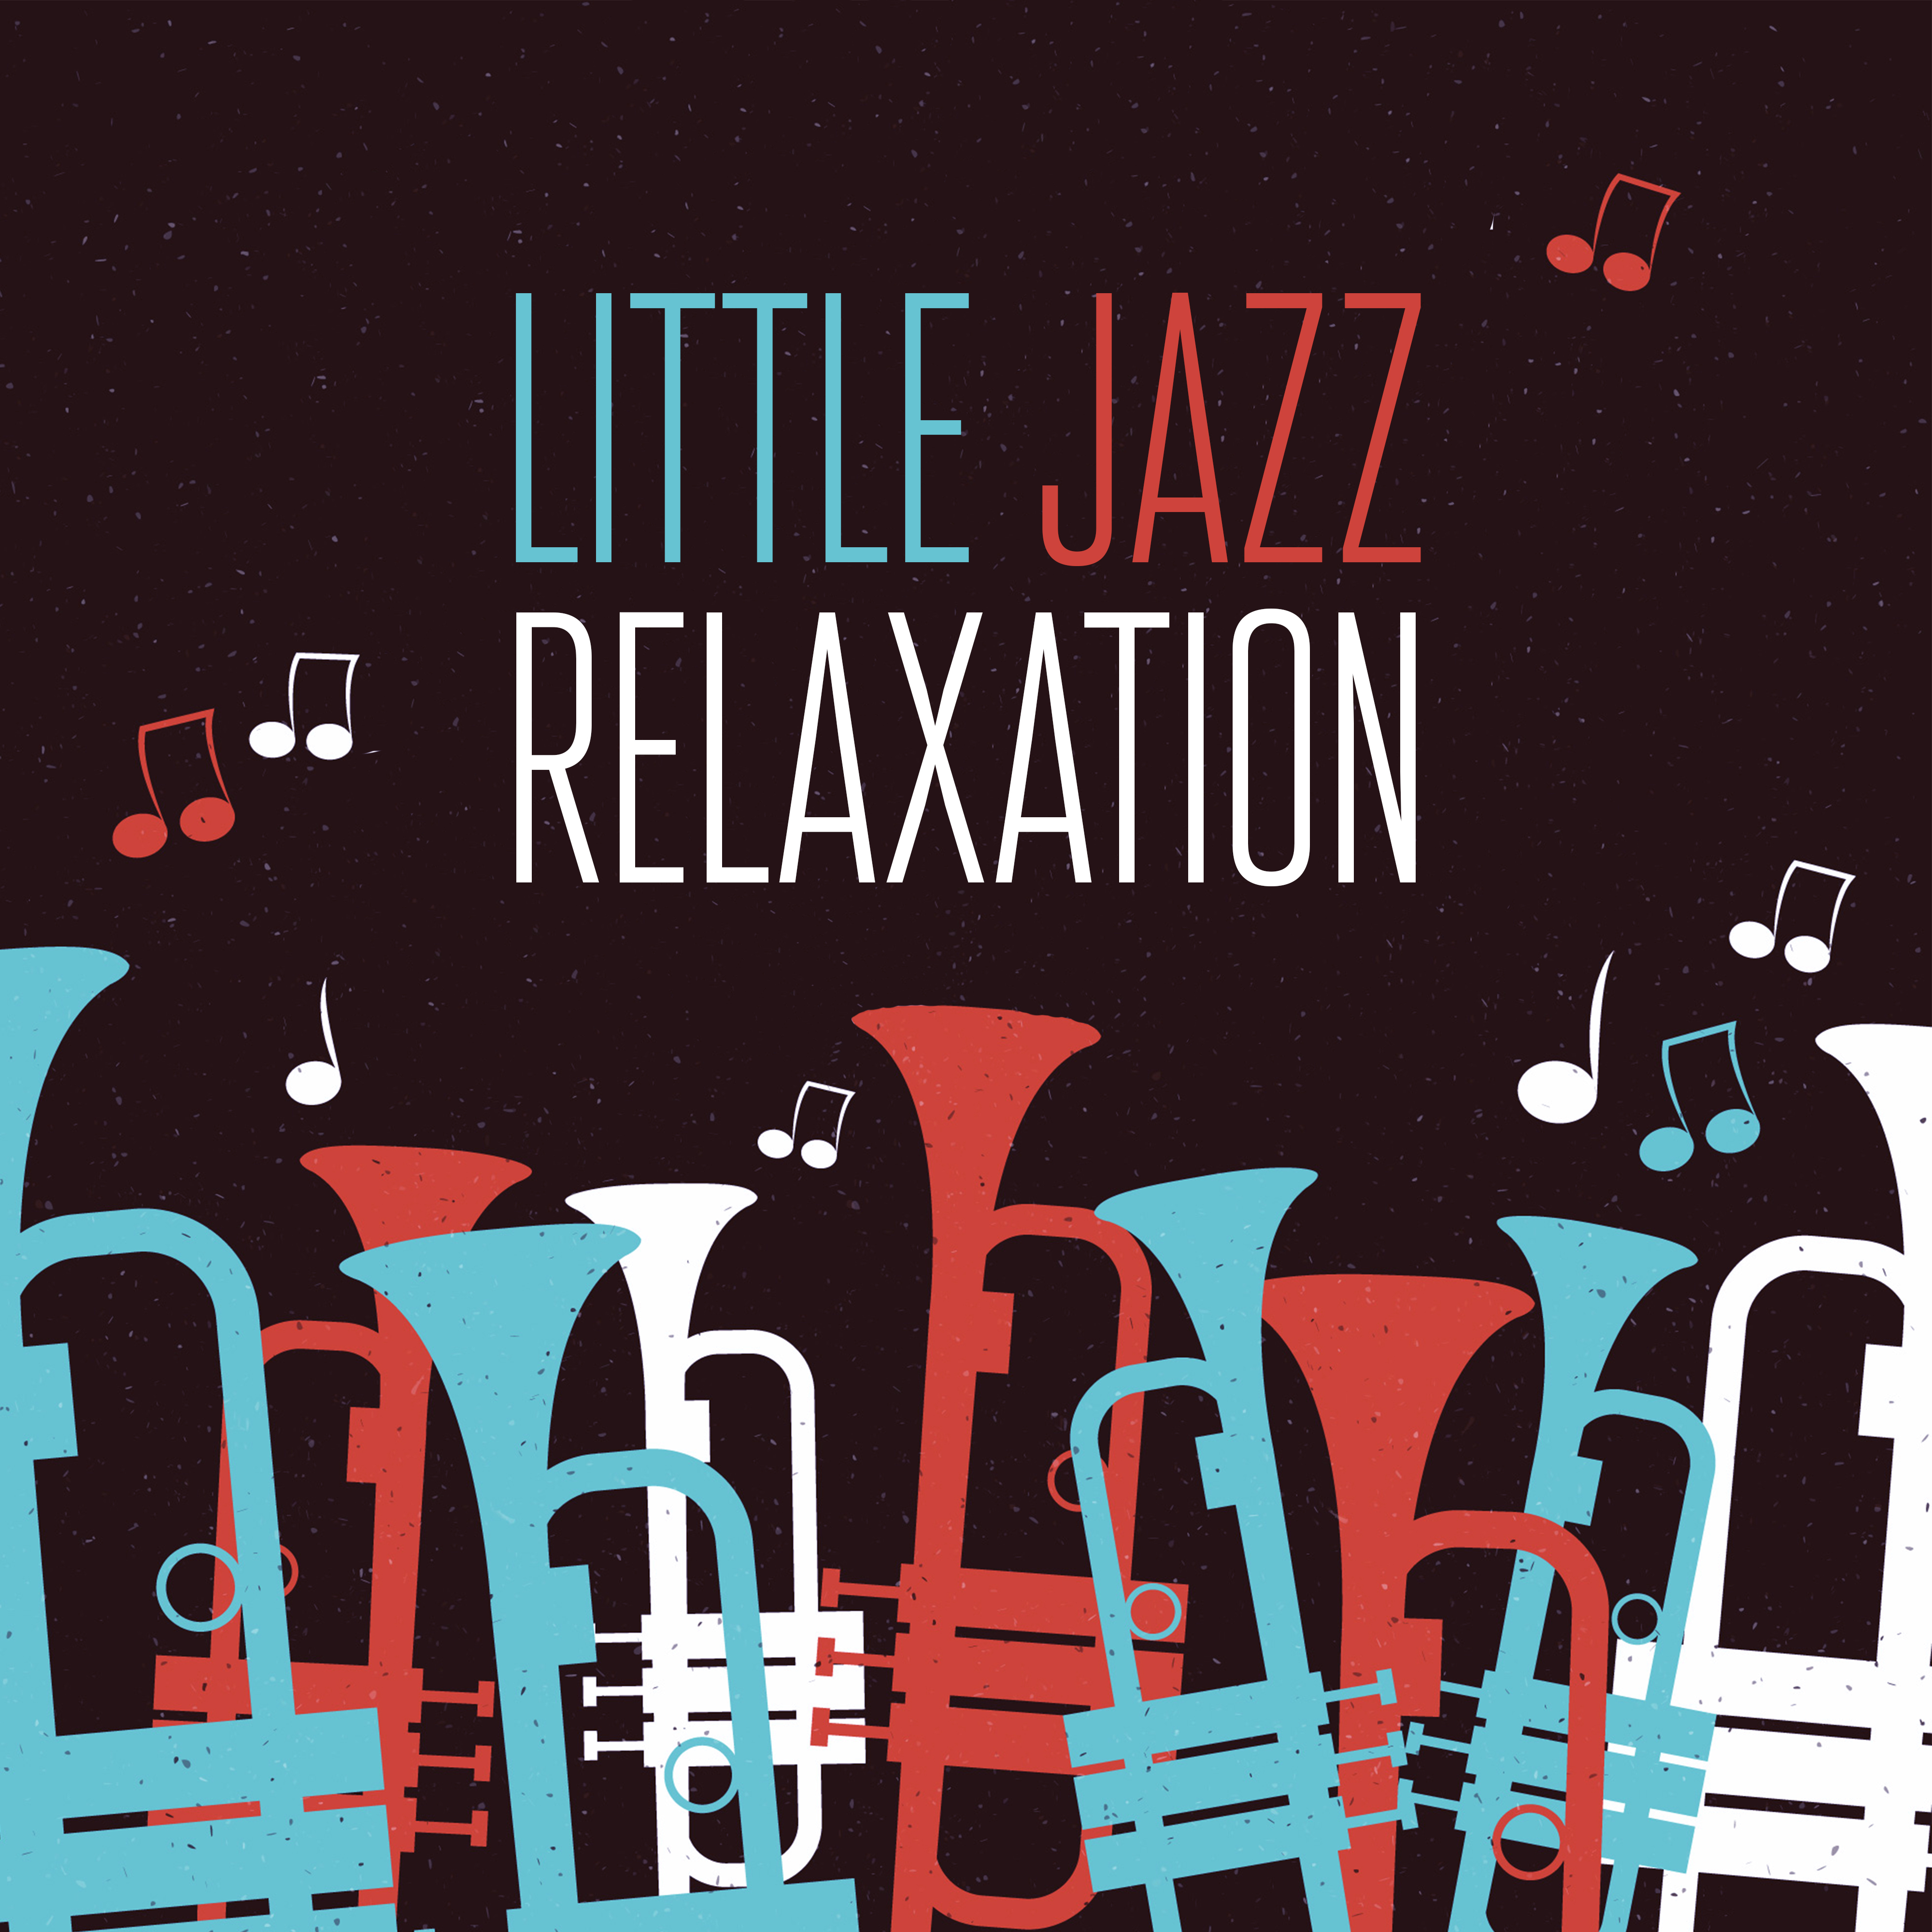 Little Jazz Relaxation